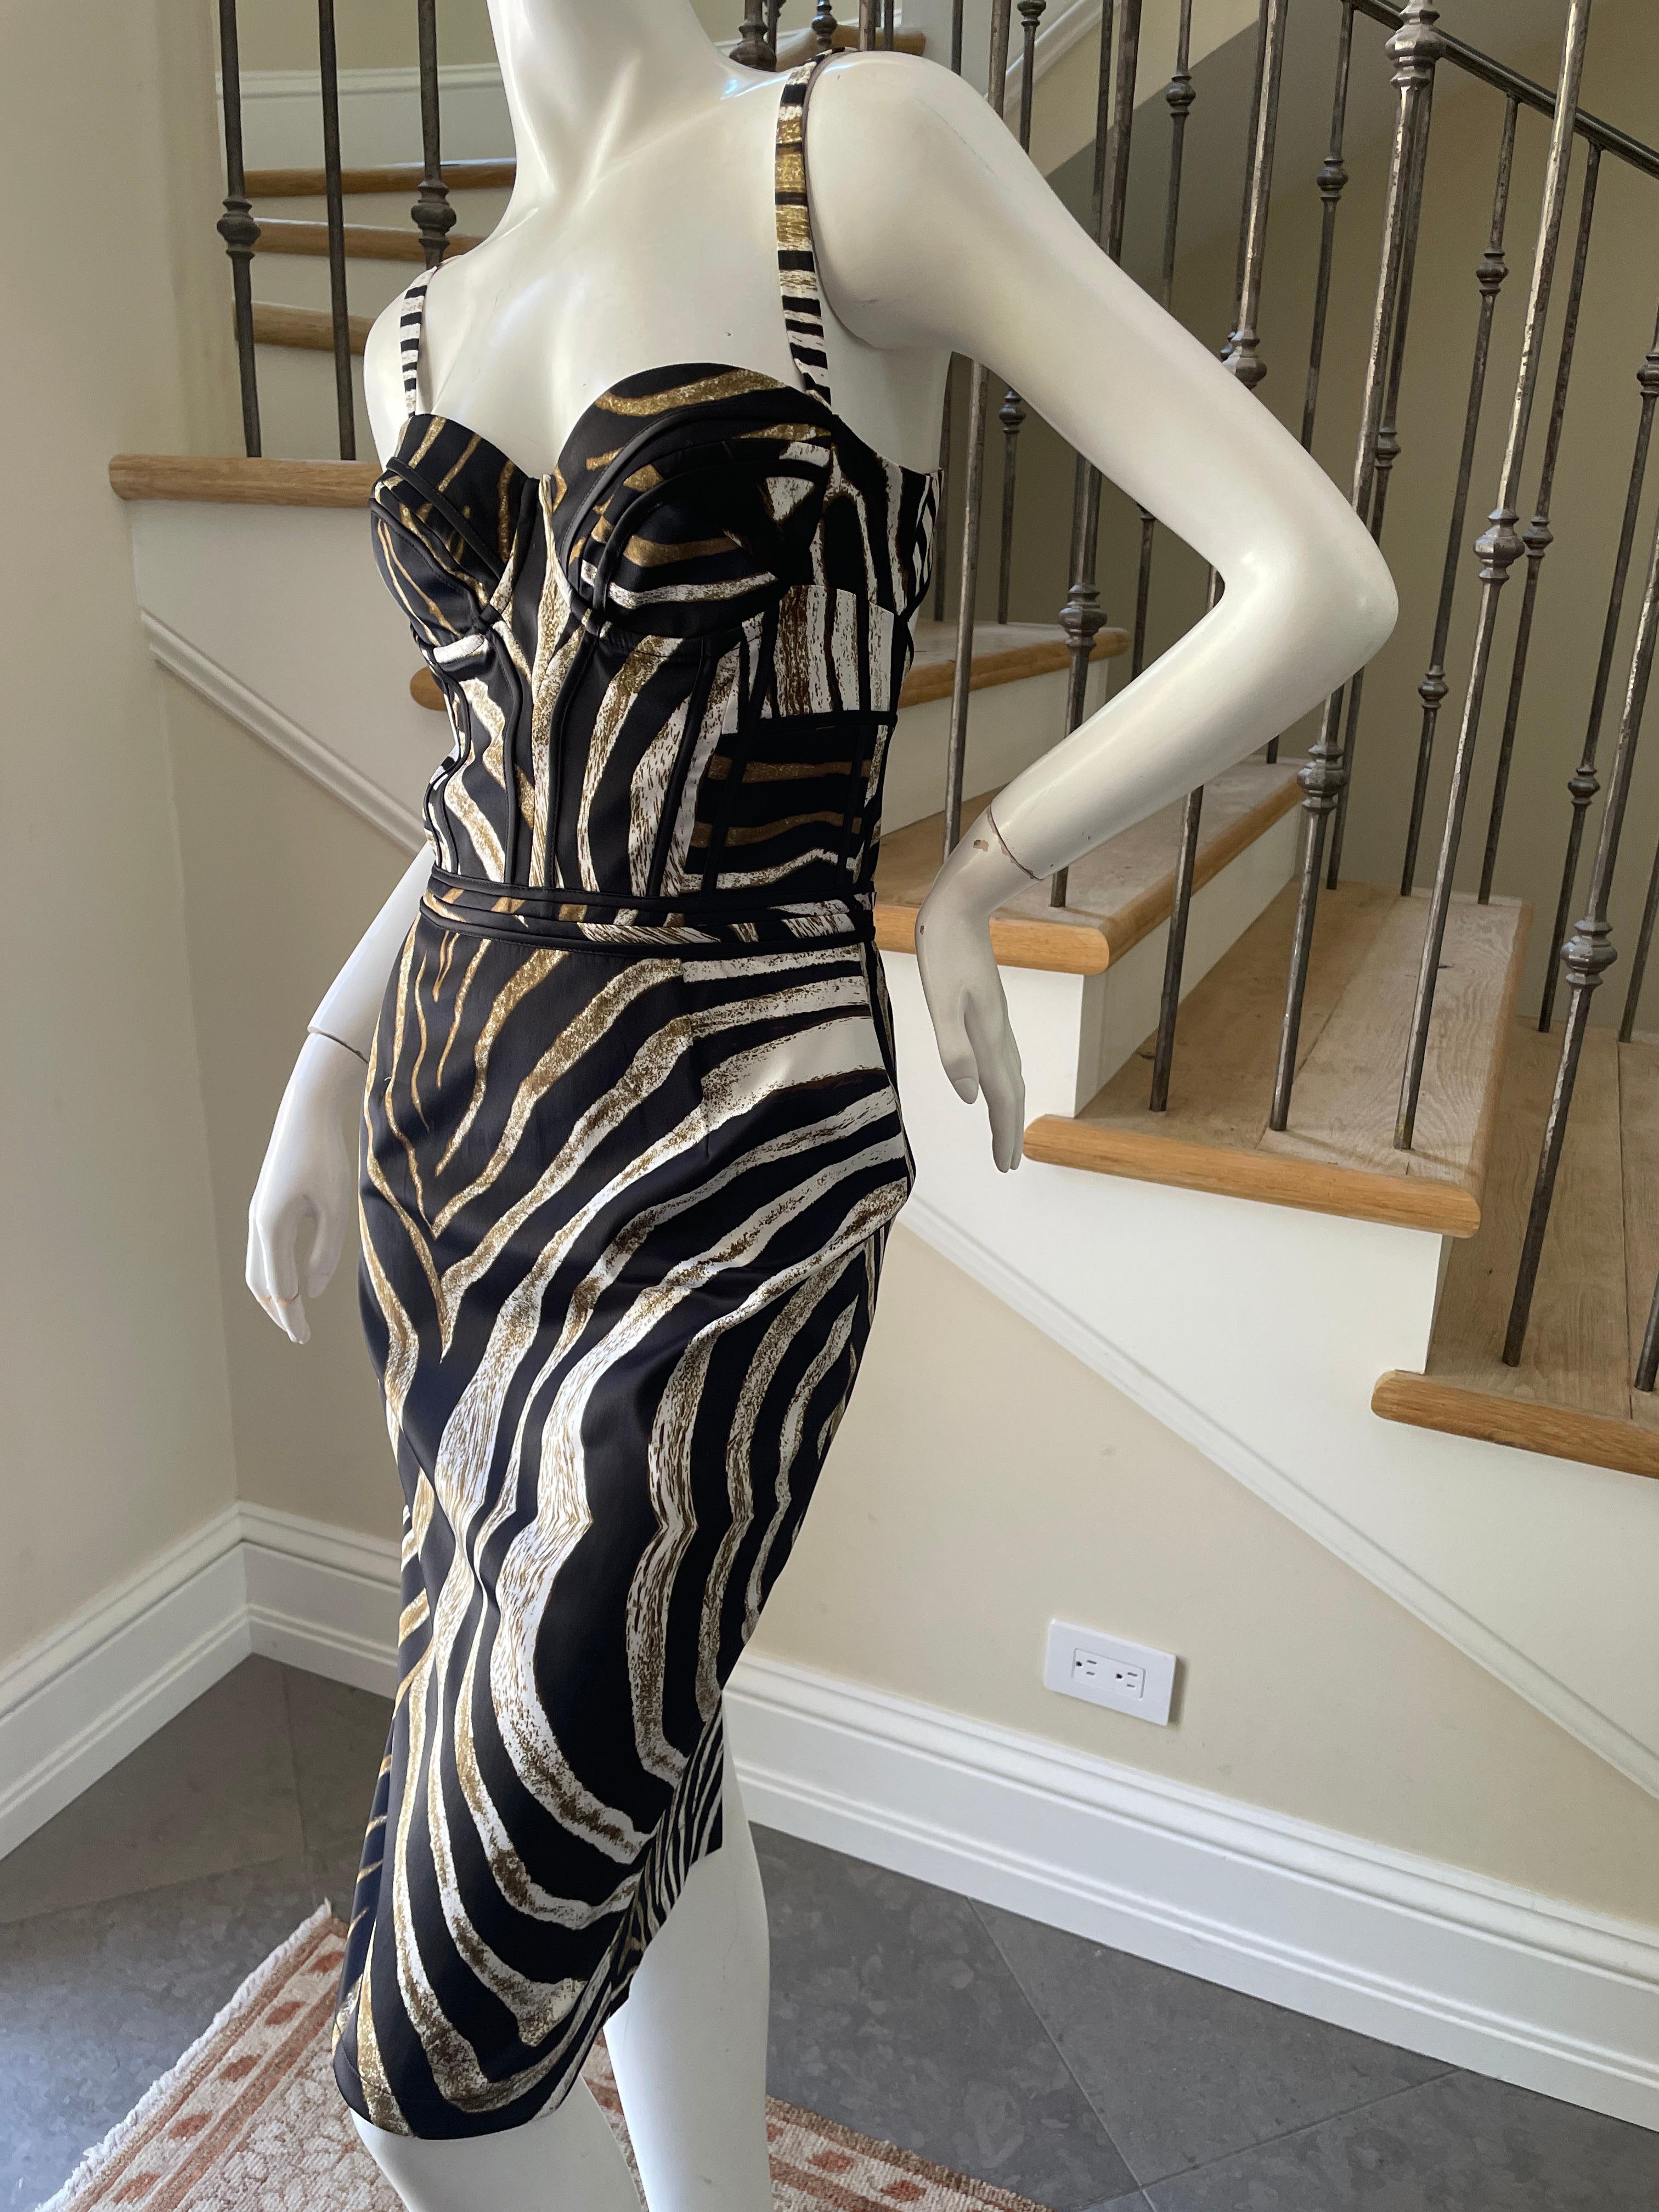 Just Cavalli Zebra Print Corset Cocktail Dress by Roberto Cavalli In Excellent Condition For Sale In Cloverdale, CA